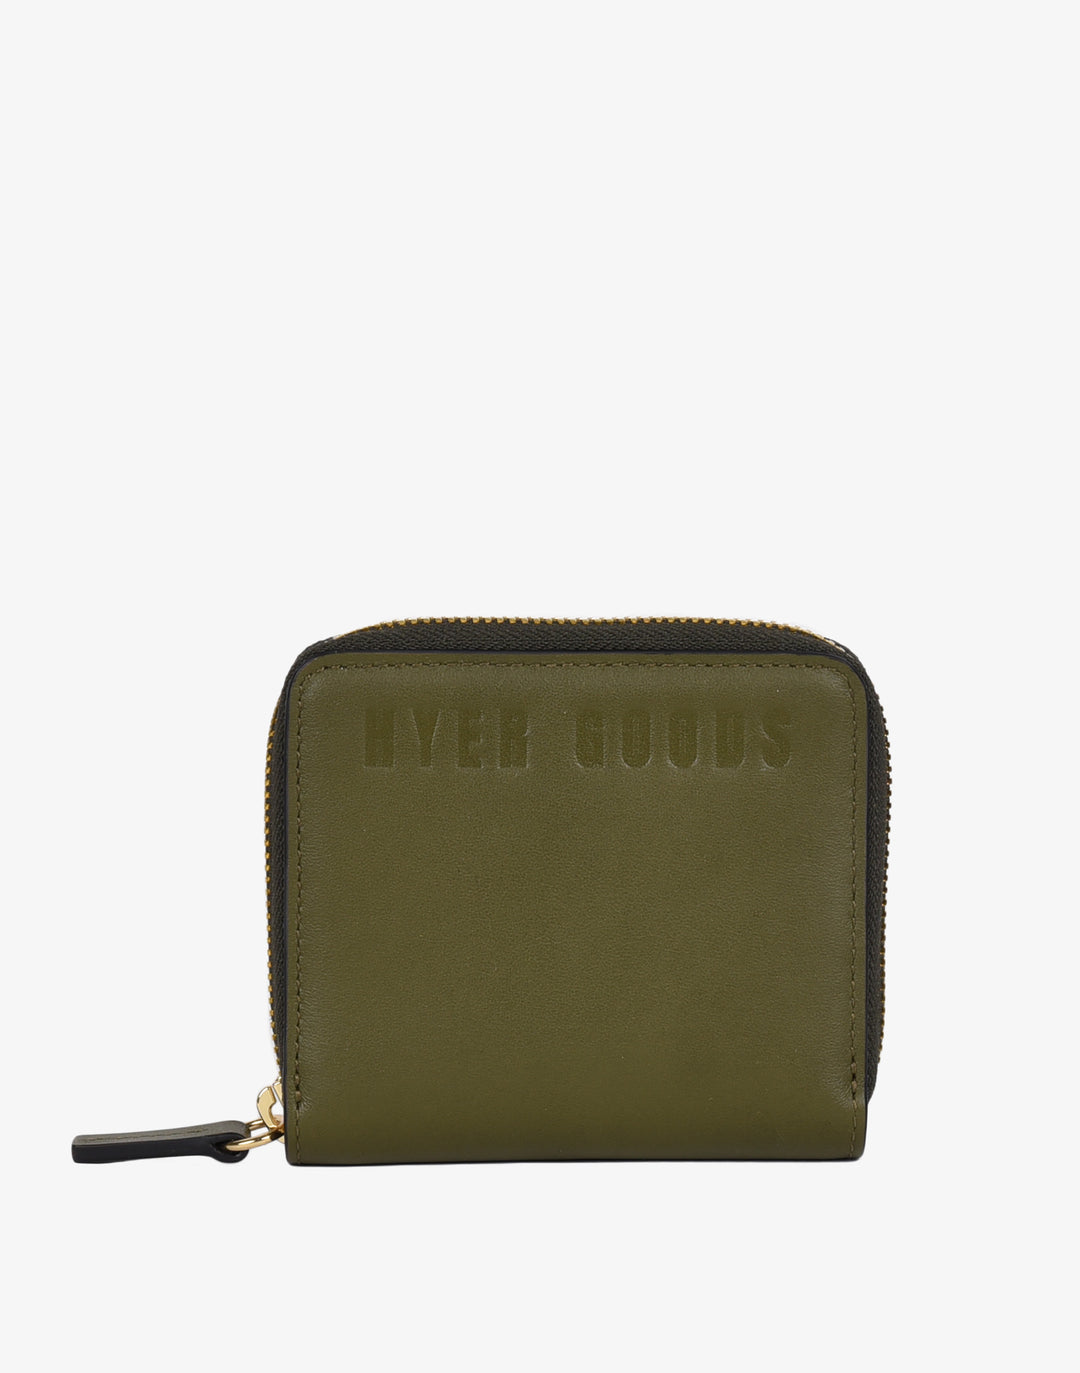 Hyer Goods - Upcycled Leather Fanny Pack - Olive